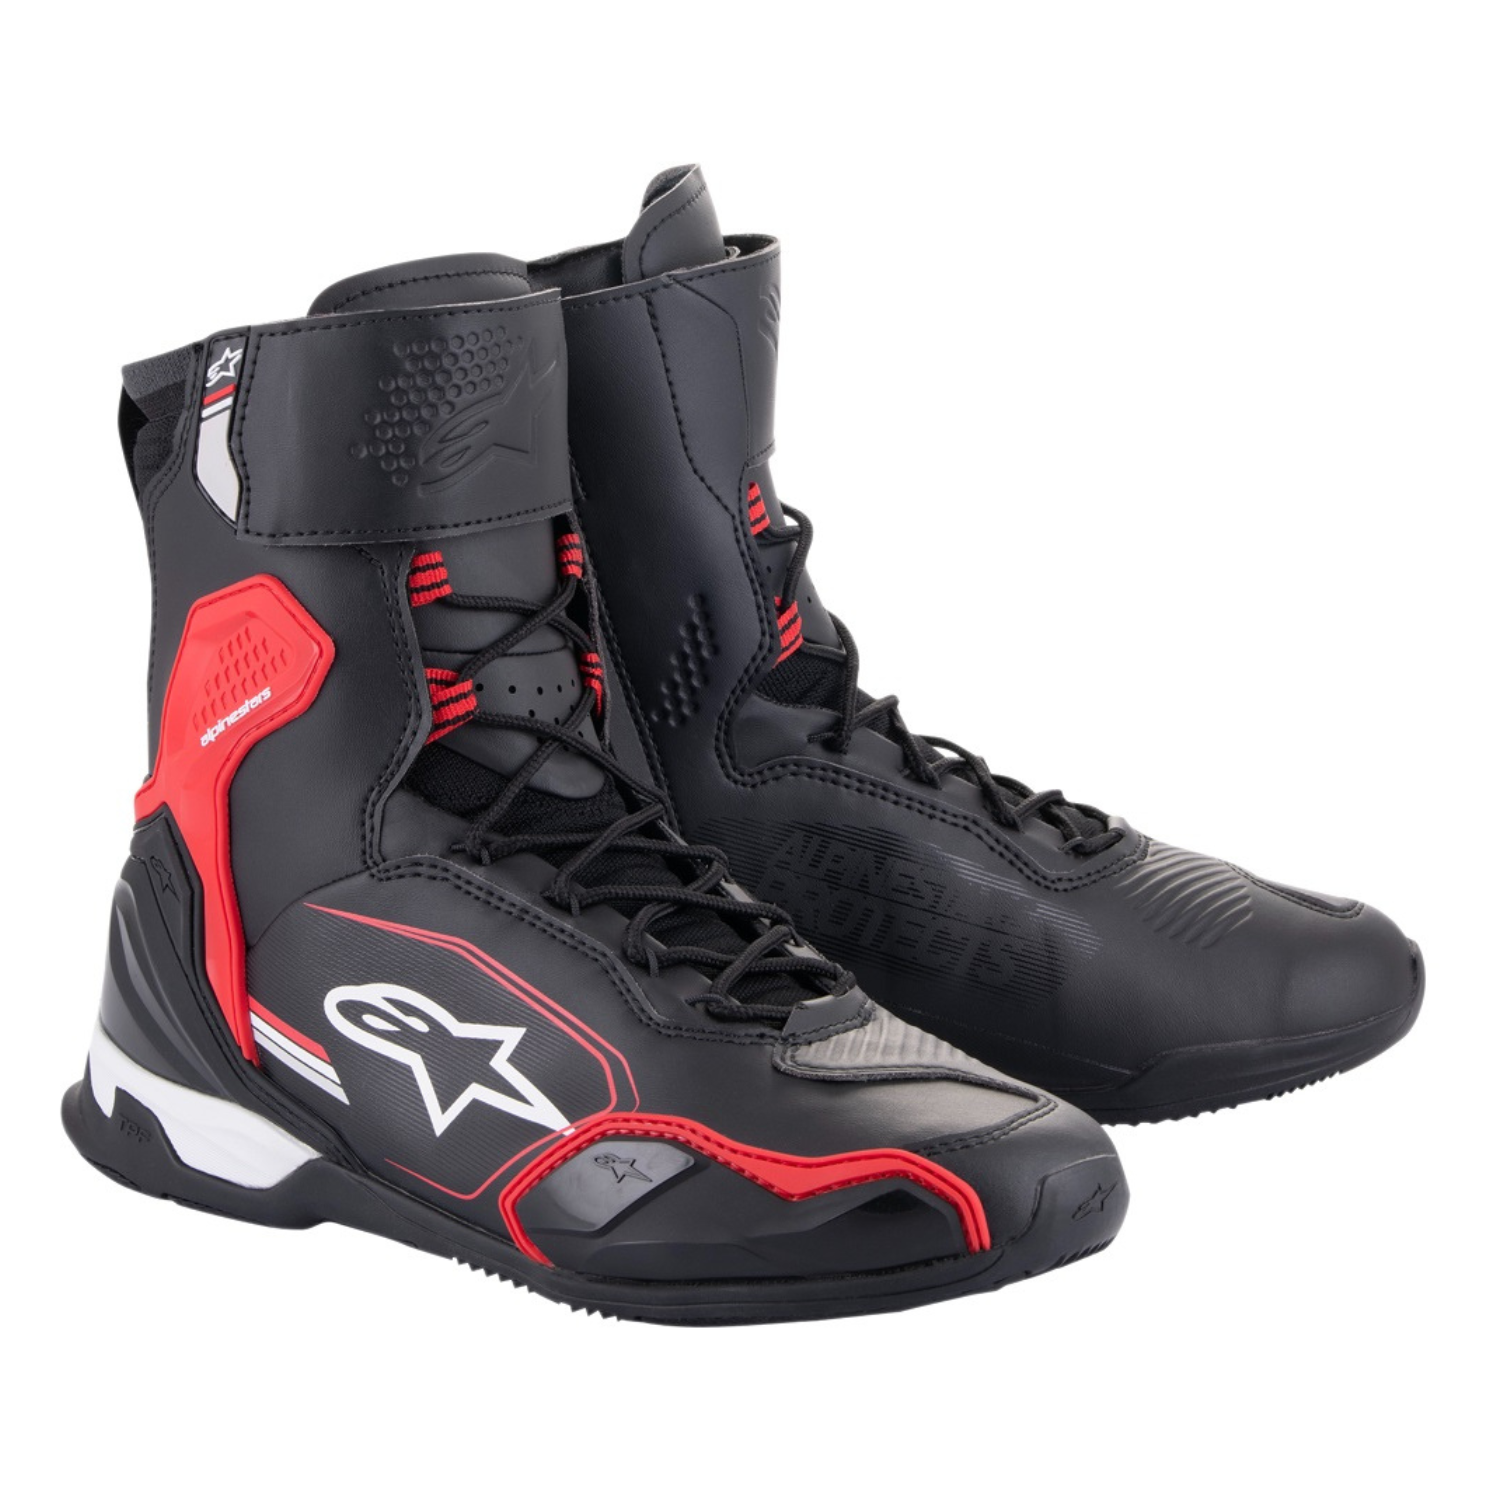 Image of Alpinestars Superfaster Shoes Black Bright Red White Size US 65 ID 8059347260914